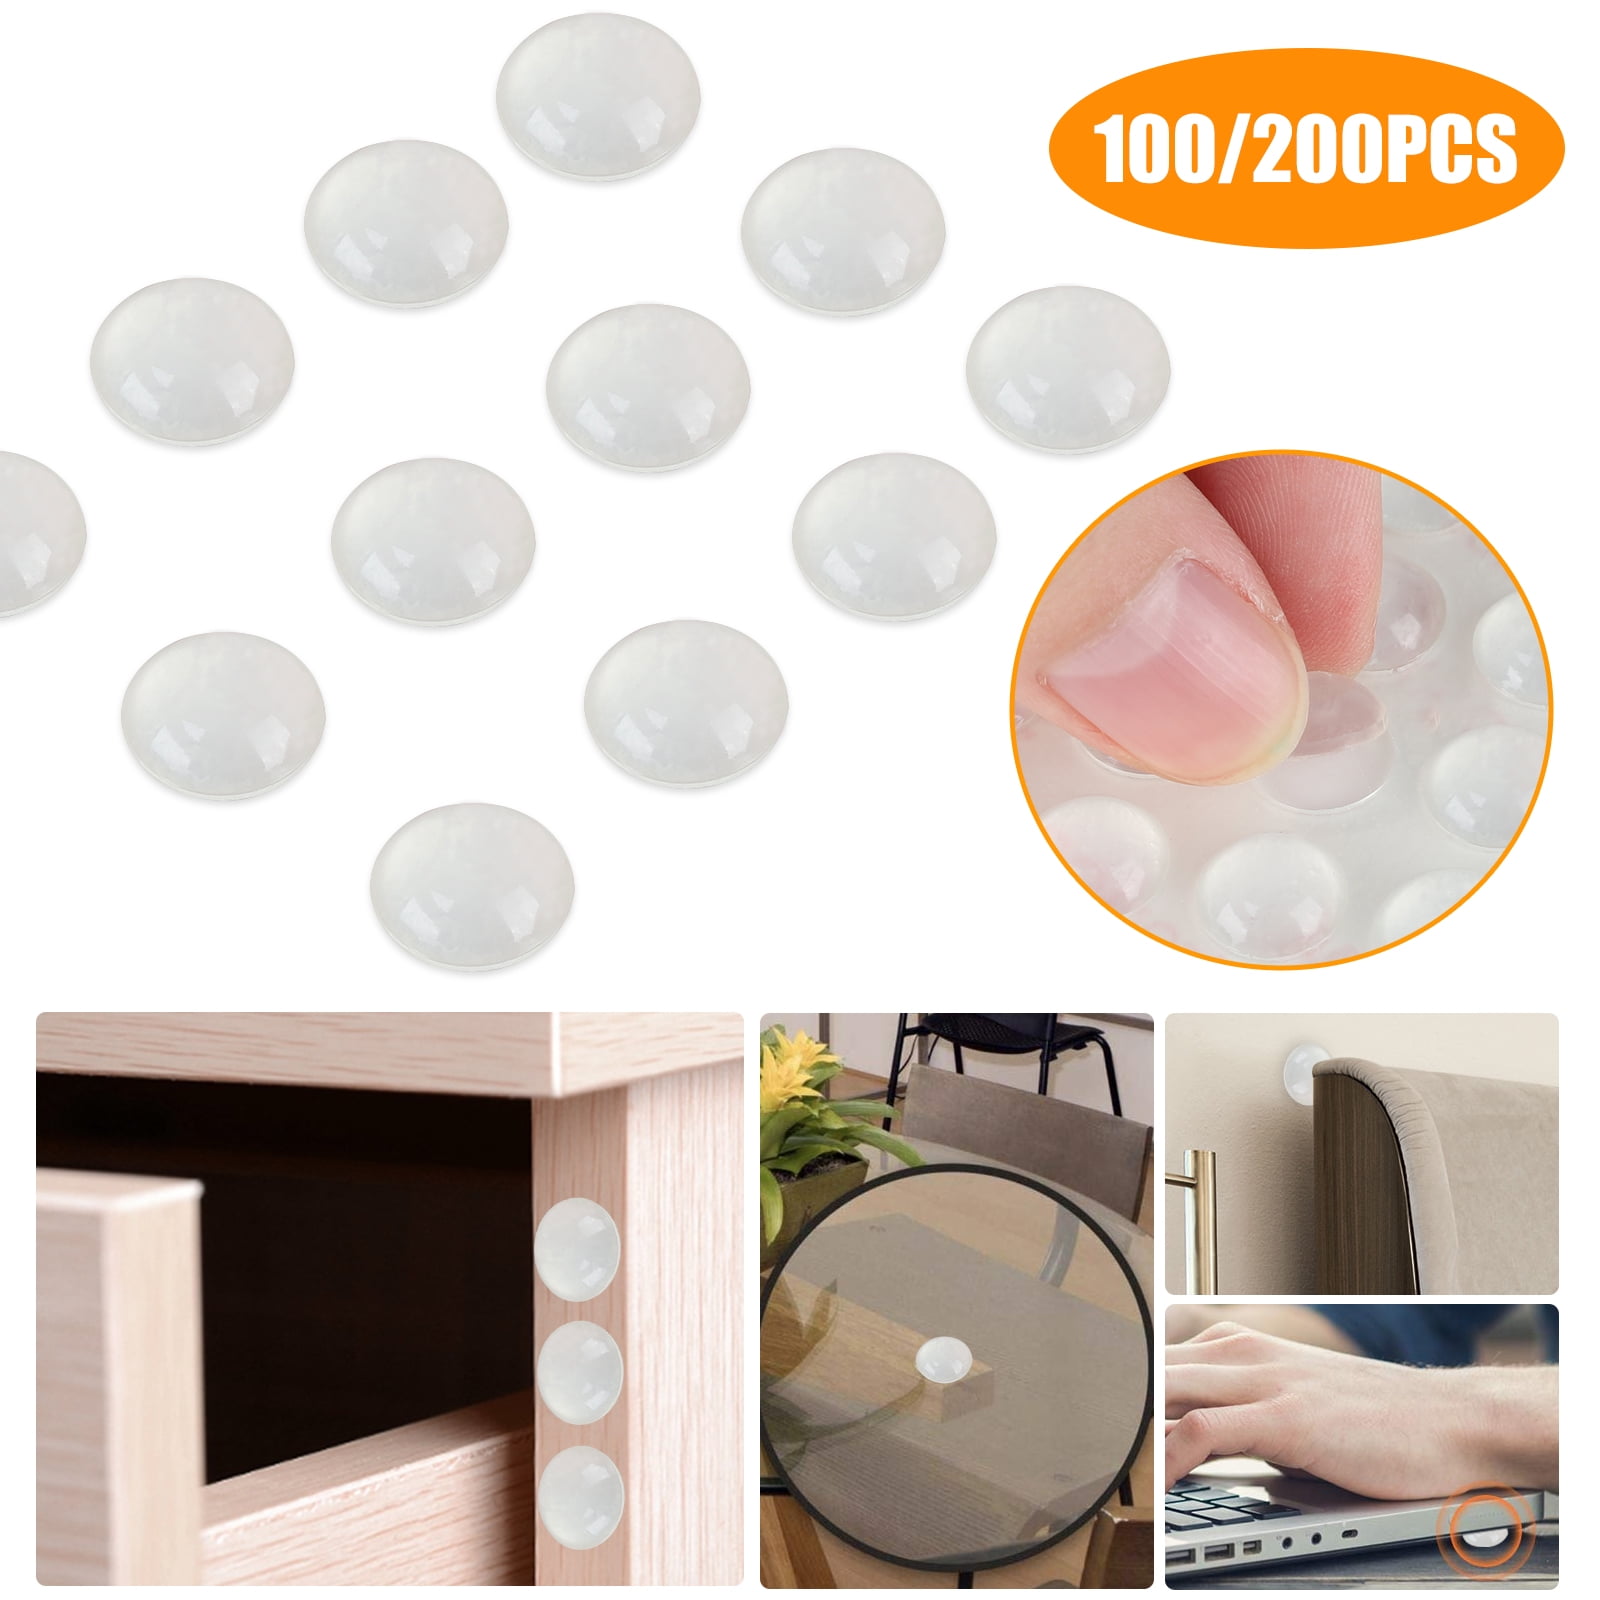 Cabinet Door Bumpers Self Adhesive Clear Rubber Bumpers Pads Noise Buffer Pads 